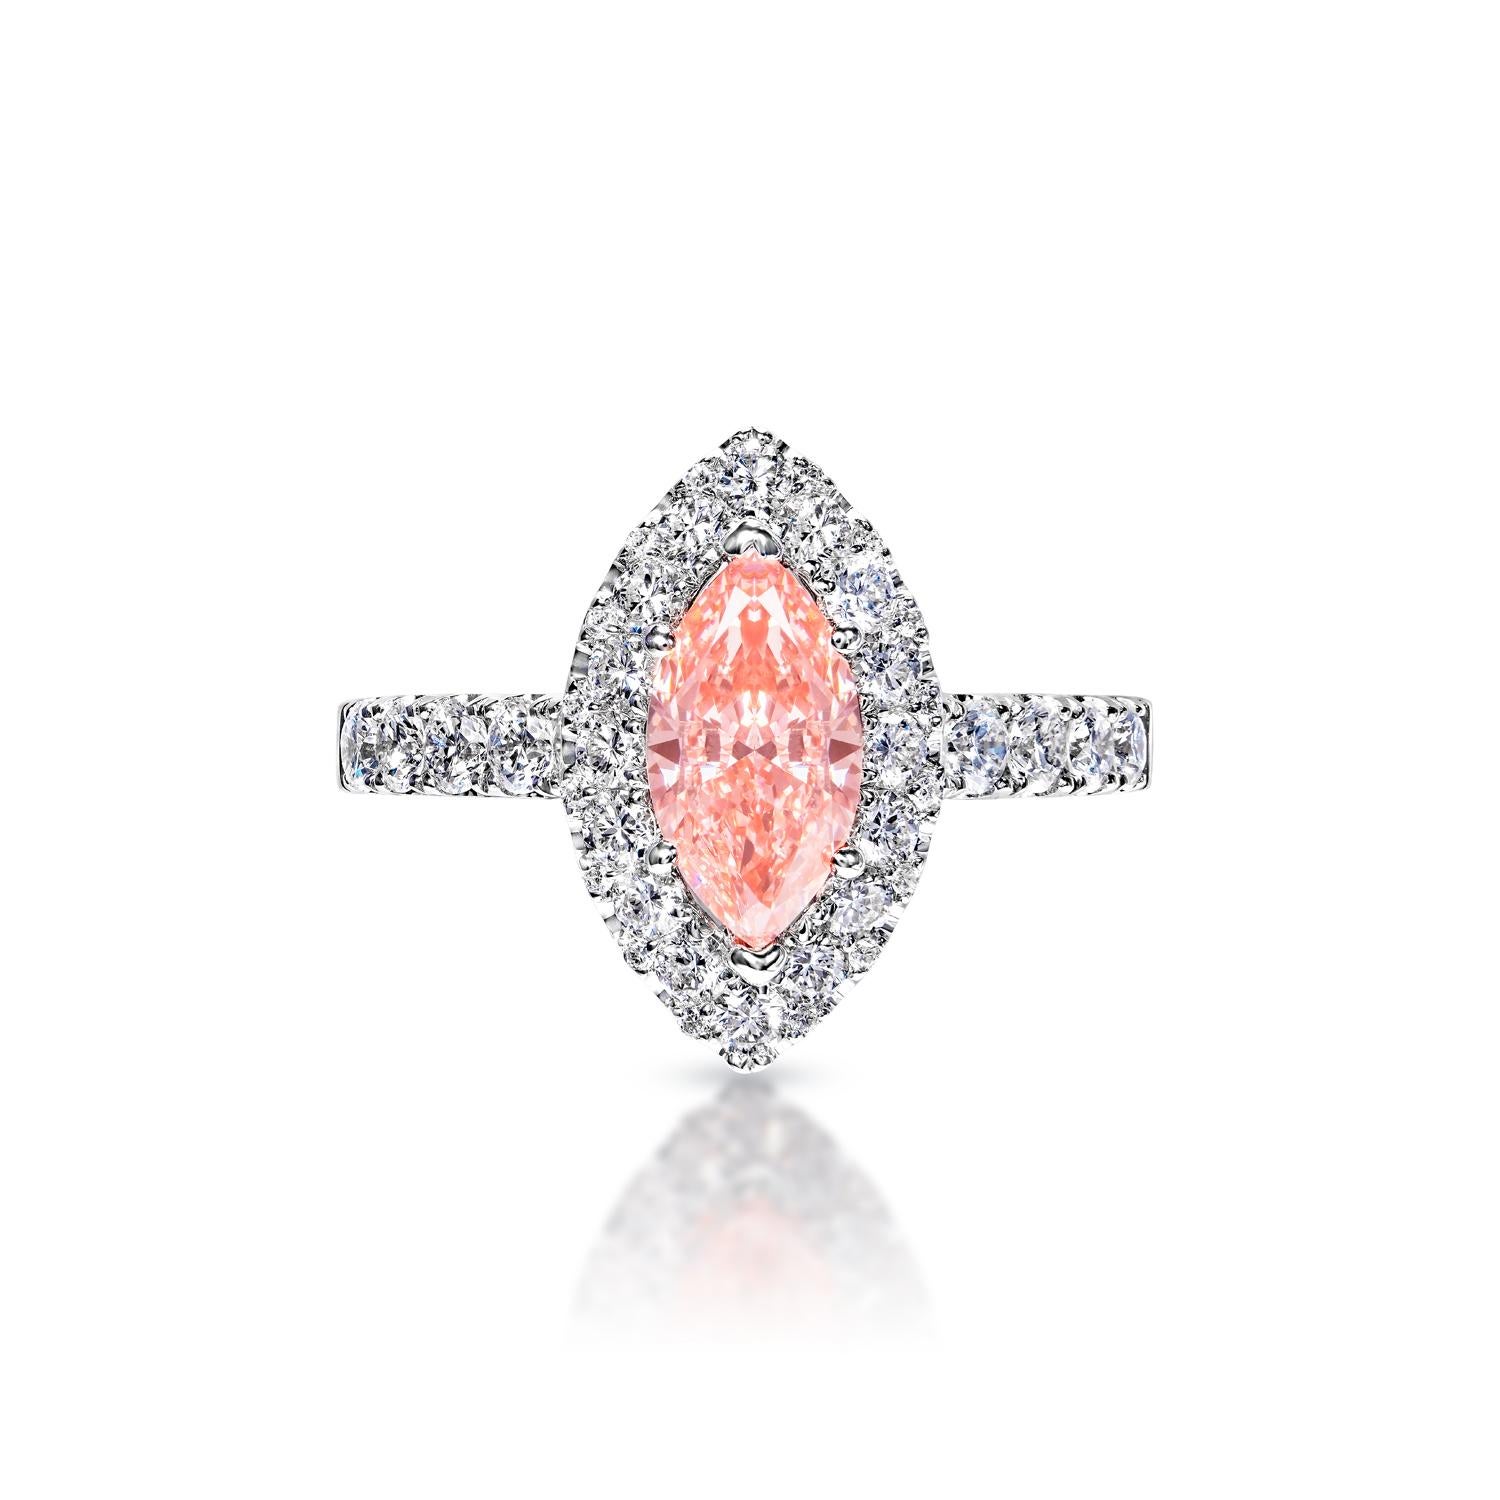 Adorn yourself with this truly stunning and unique GIA Certified diamond set. Featuring an eye-catching Fancy Vivid Pink* Marquise Cut center stone, along with a Round Brilliant cut side stone for beautiful contrast, the total carat weight of 1.67